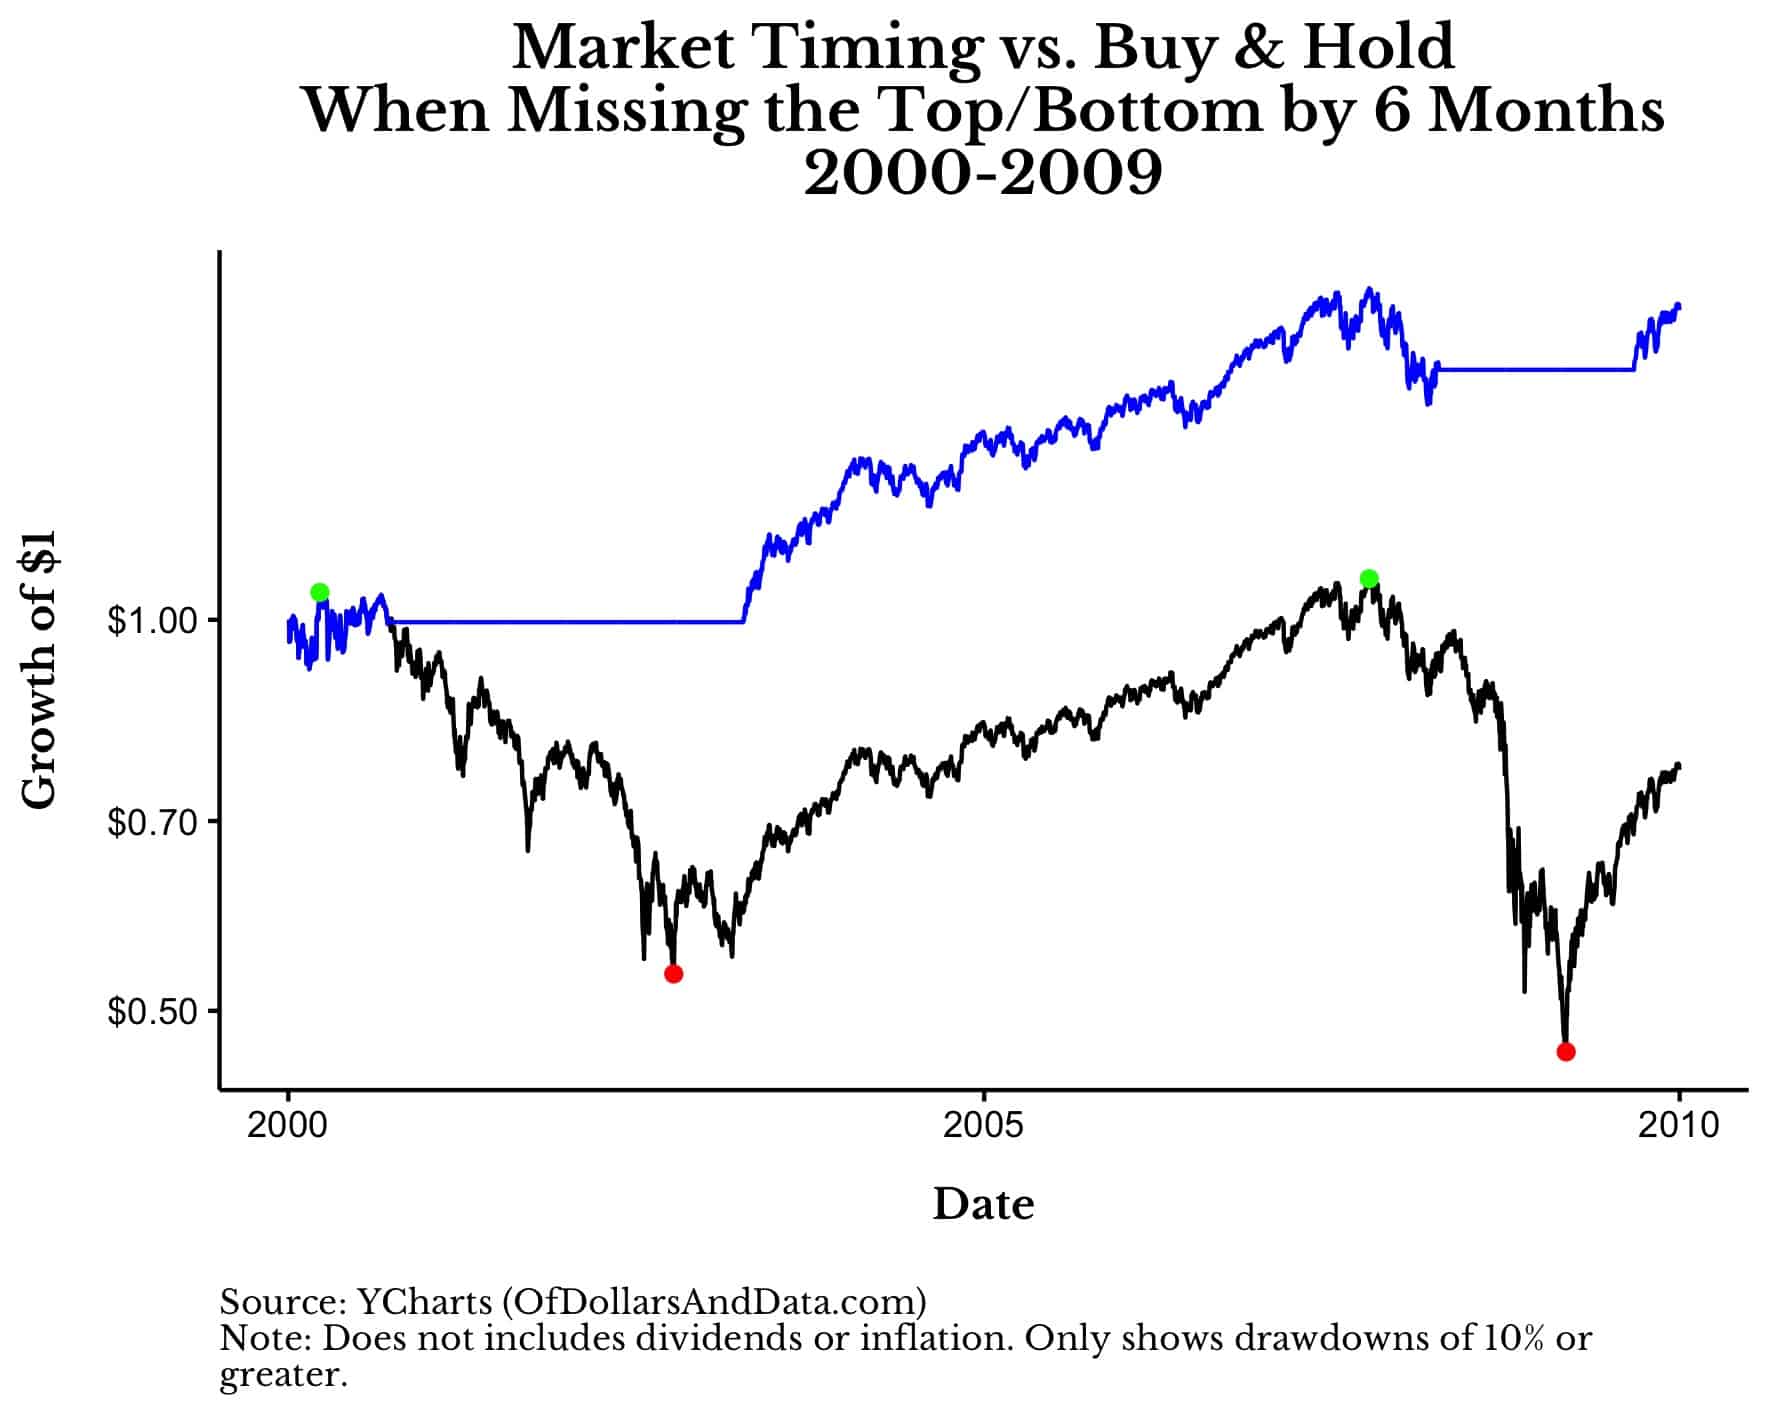 Market timing vs Buy and Hold when missing the top/bottom by 6 months, 2000-2009